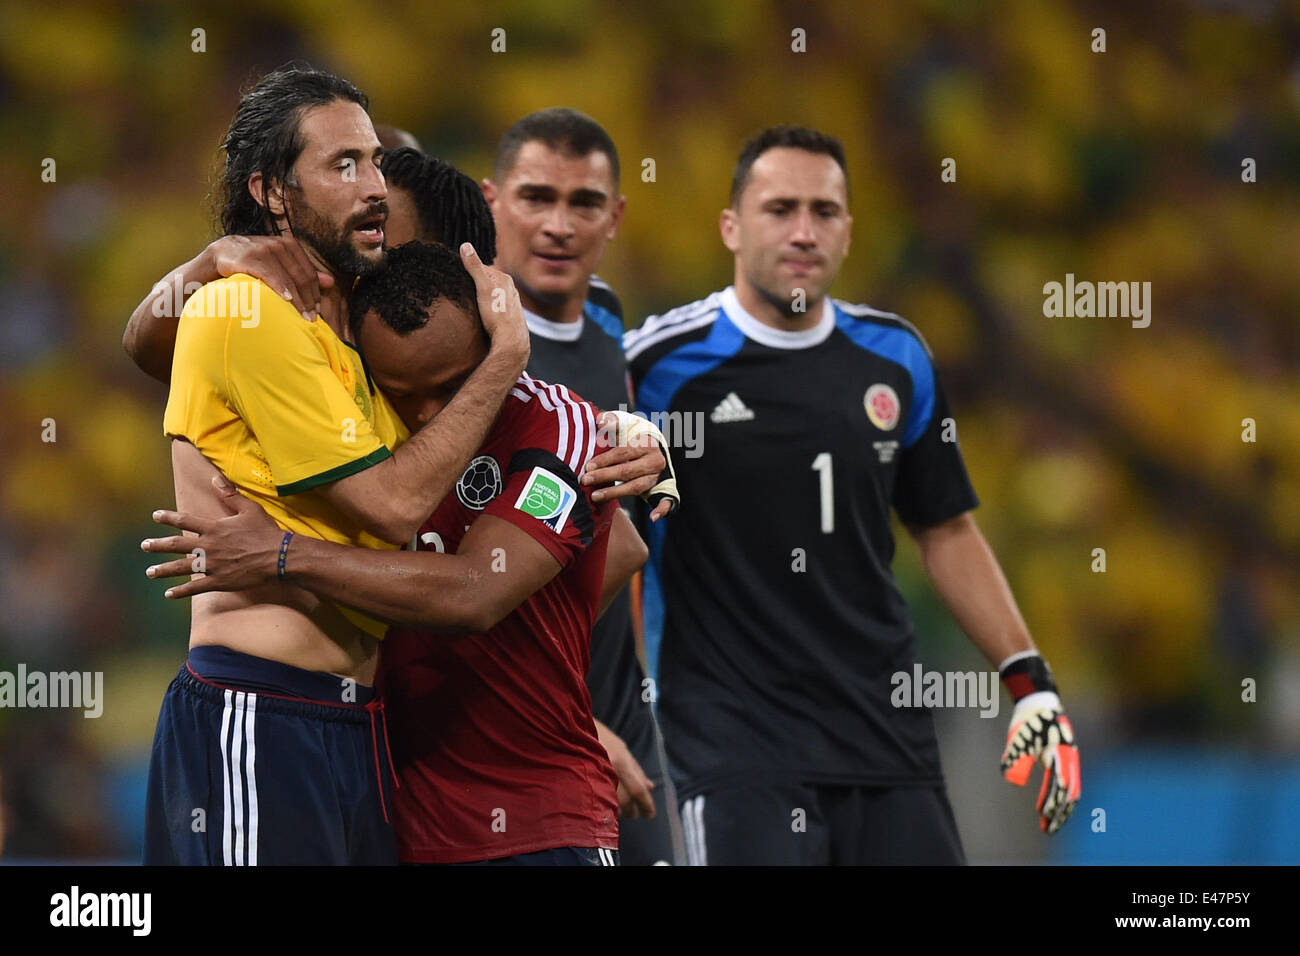 Fortaleza, Brazil. 04th July, 2014. Mario Yepes (L-R), Juan Zuniga and goalkeeper David Ospina of Colombia react after the FIFA World Cup 2014 quarter final match soccer between Brazil and Colombia at the Estadio Castelao in Fortaleza, Brazil, 04 July 2014. Photo: Marius Becker/dpa/Alamy Live News Stock Photo